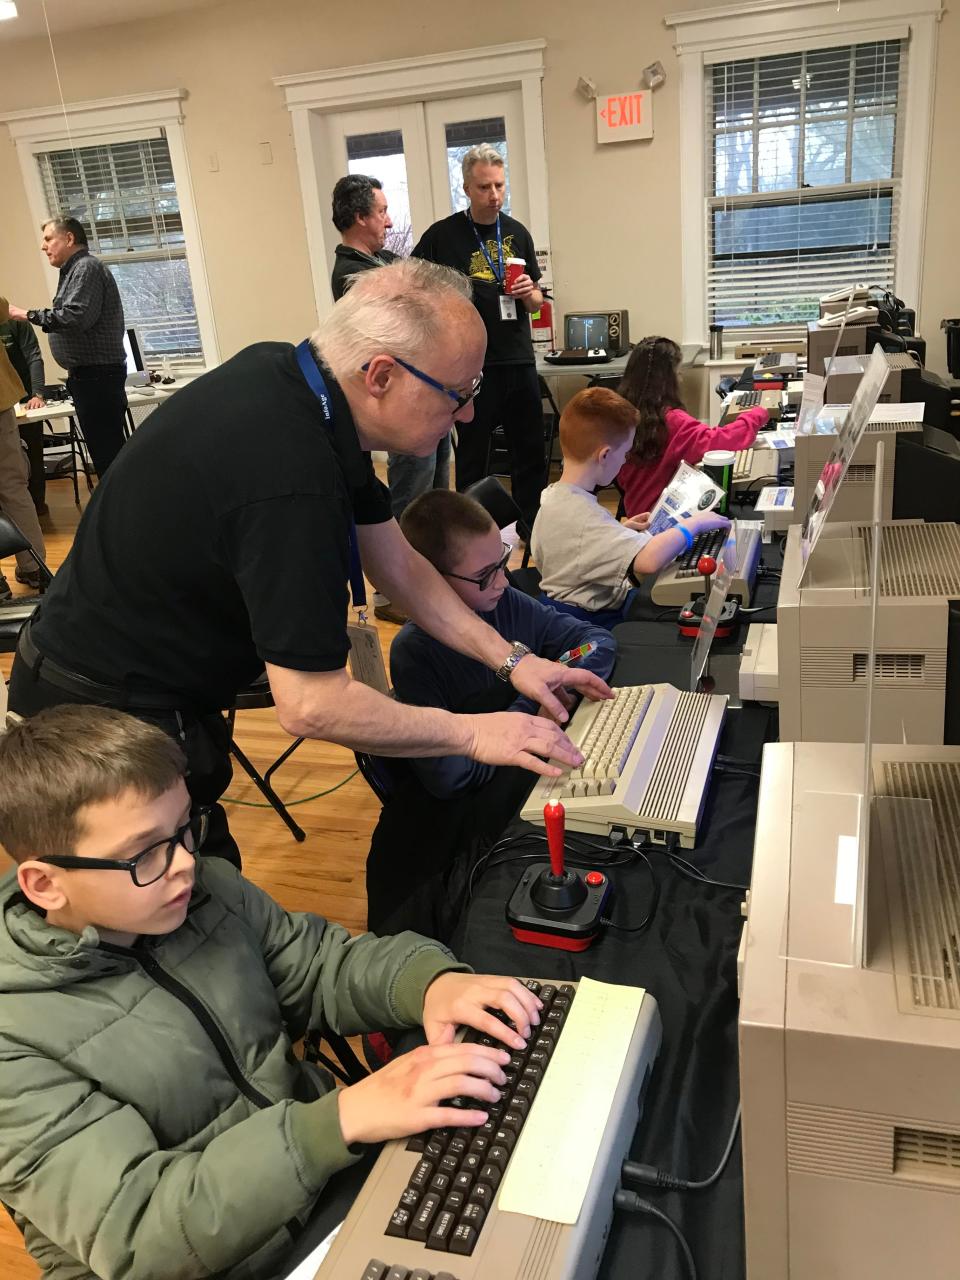 Under the guidance of Vintage Computer Society volunteers, 2023 NJ Makers Day attendees make music, draw and program on some of the first personal computers ever made at InfoAge Science & History Museums in Wall.